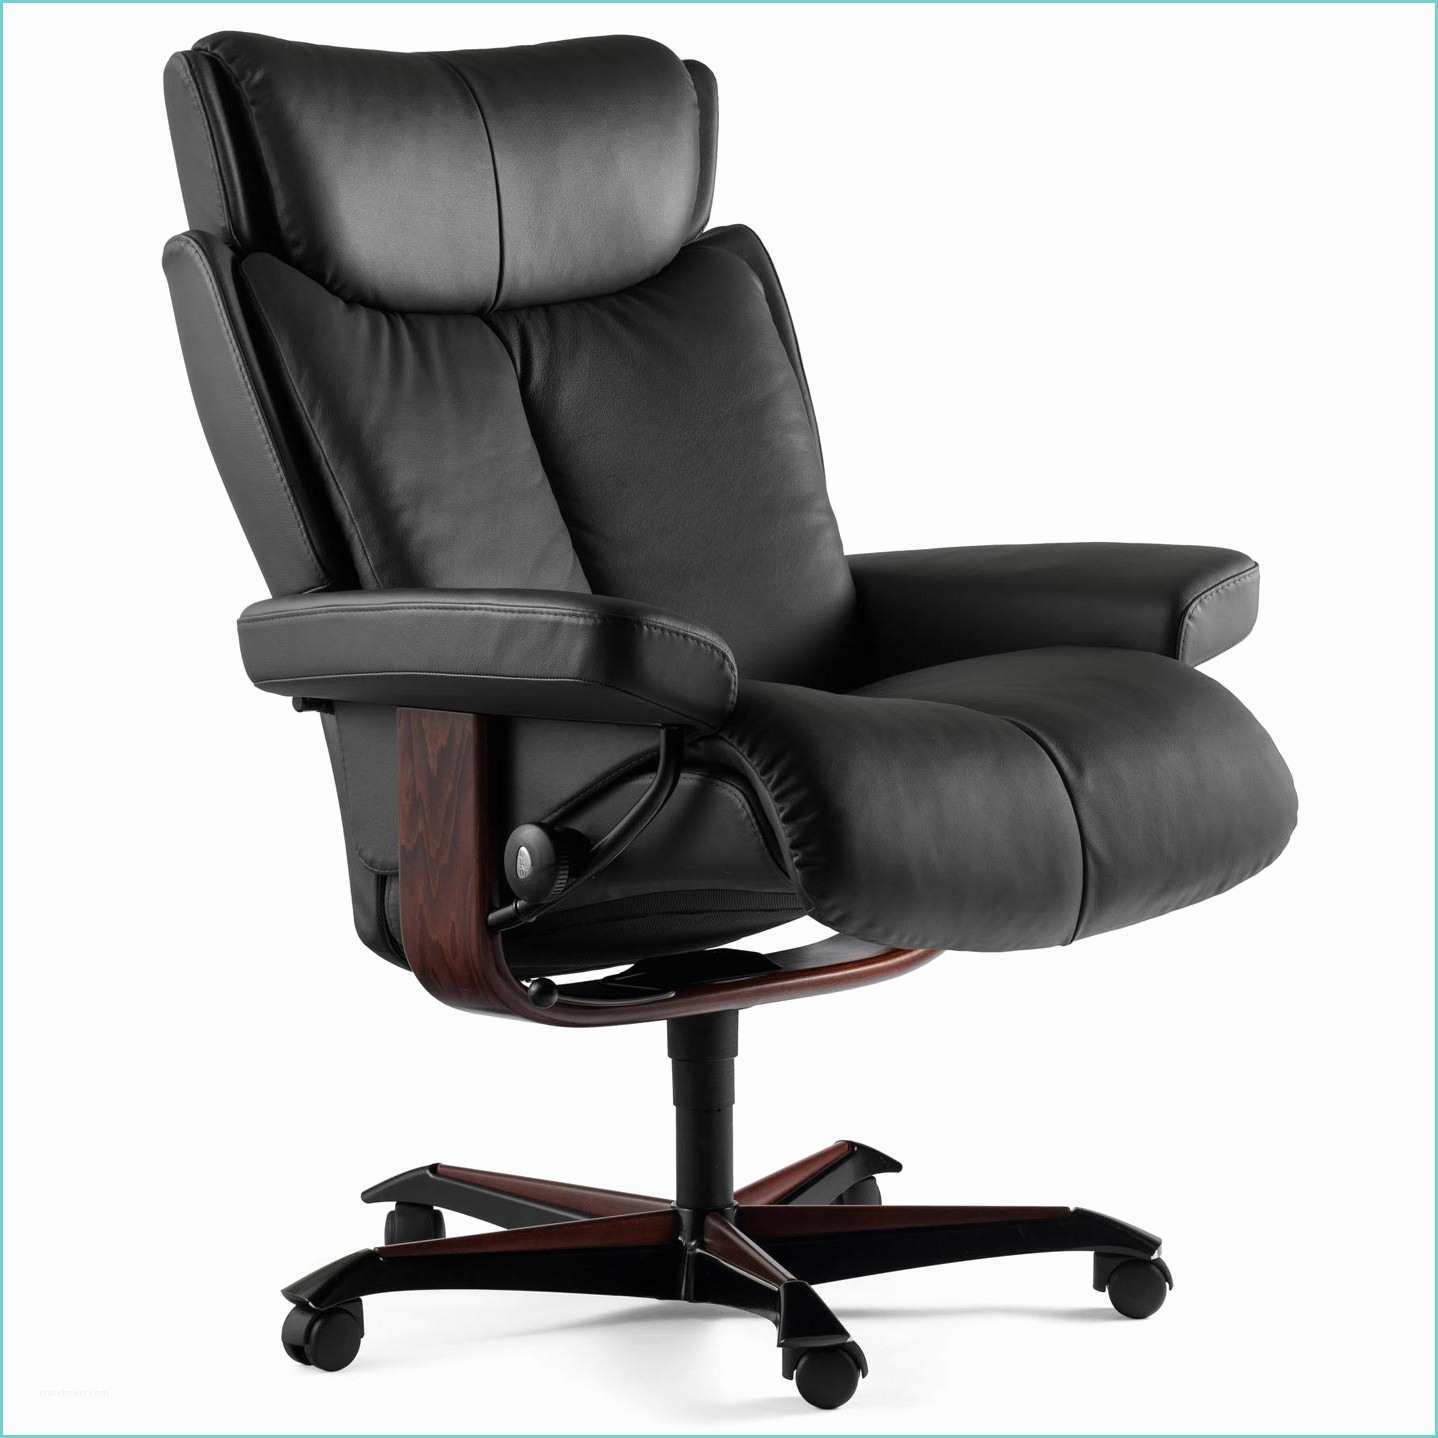 Stressless Magic Chair Review Stressless Magic Fice Chair From $3 395 00 by Stressless